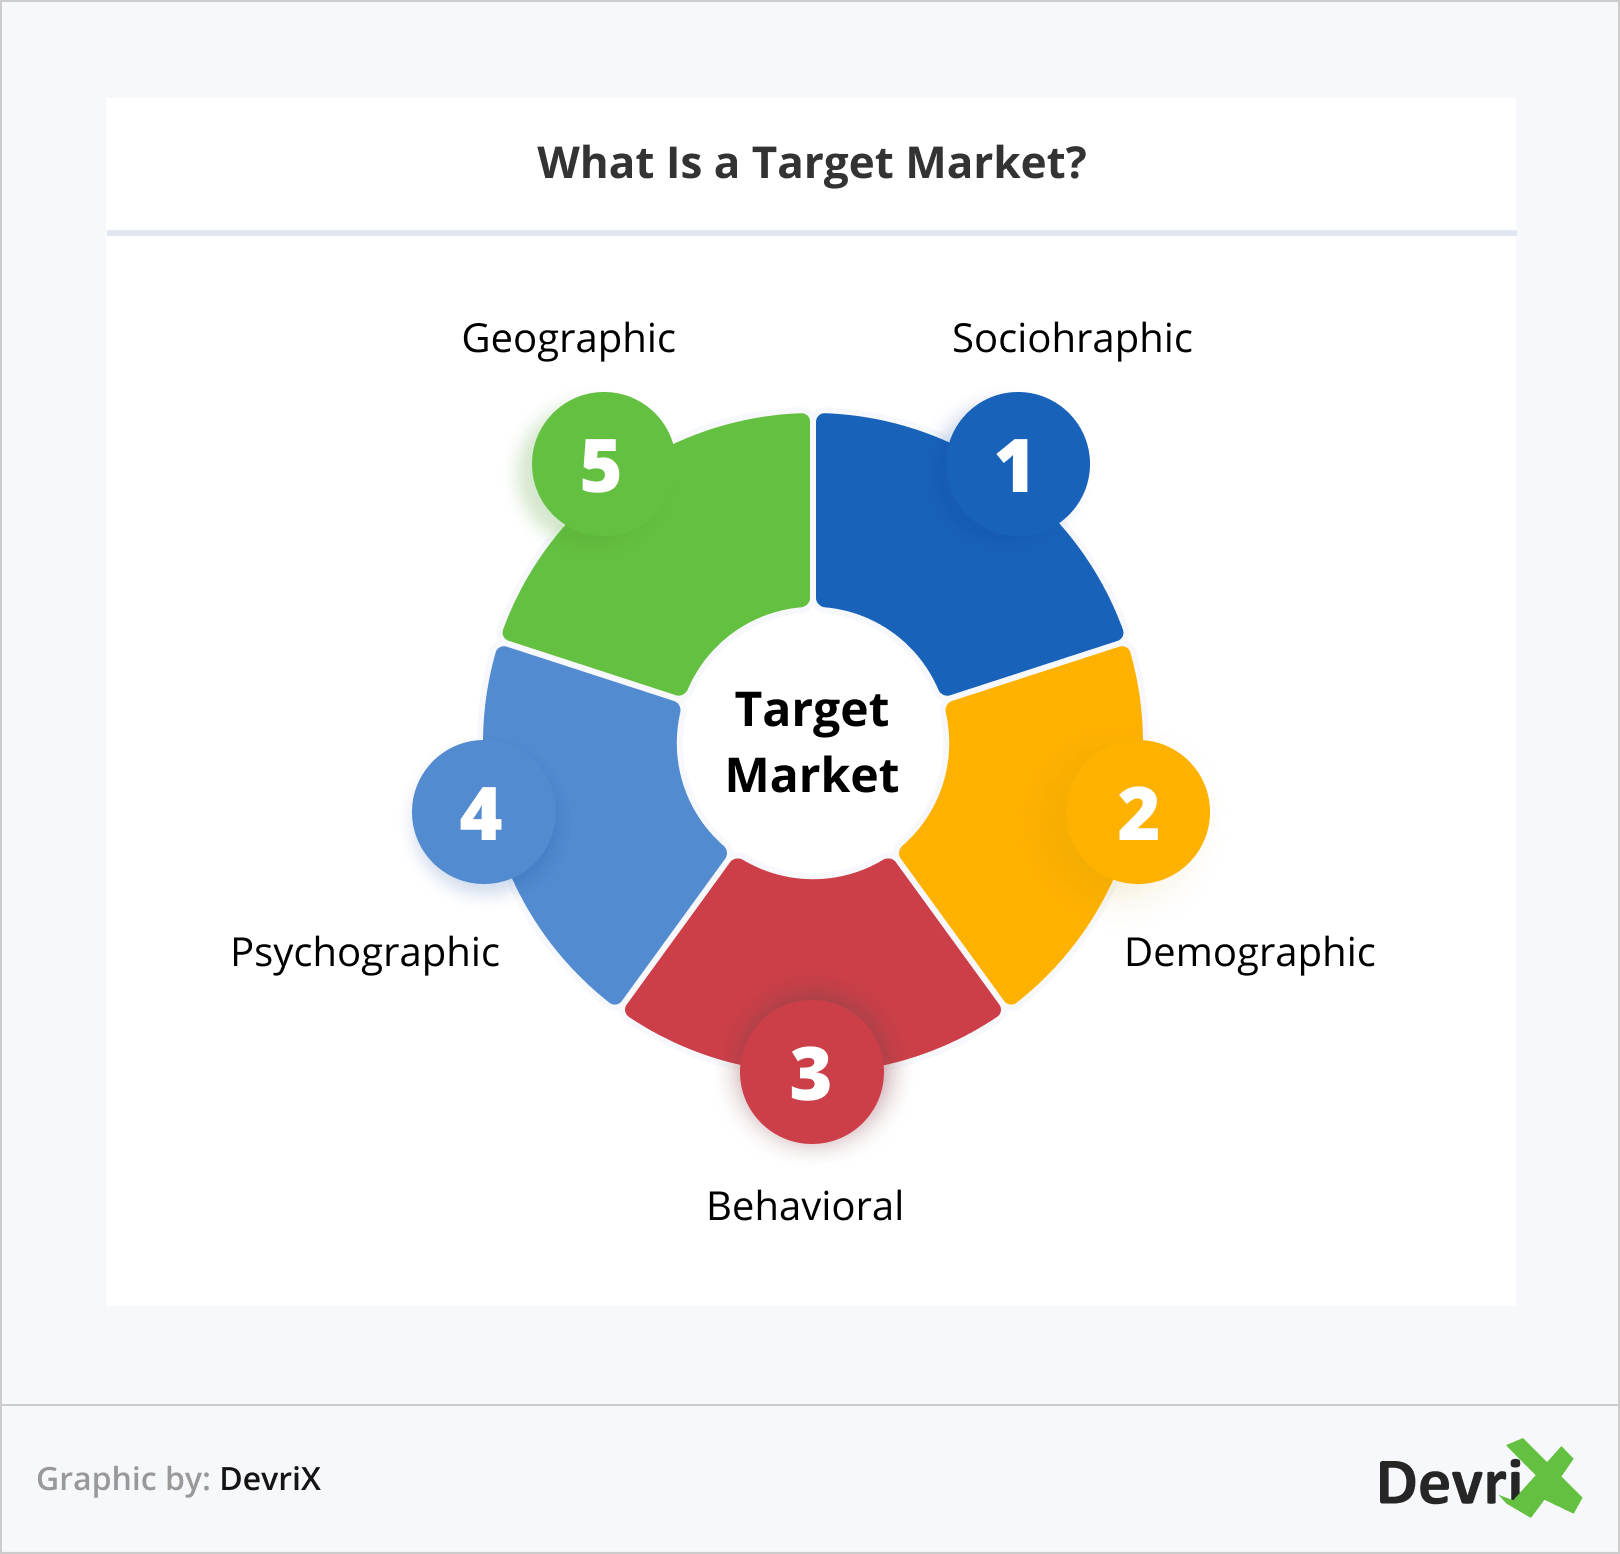 What Is a Target Market